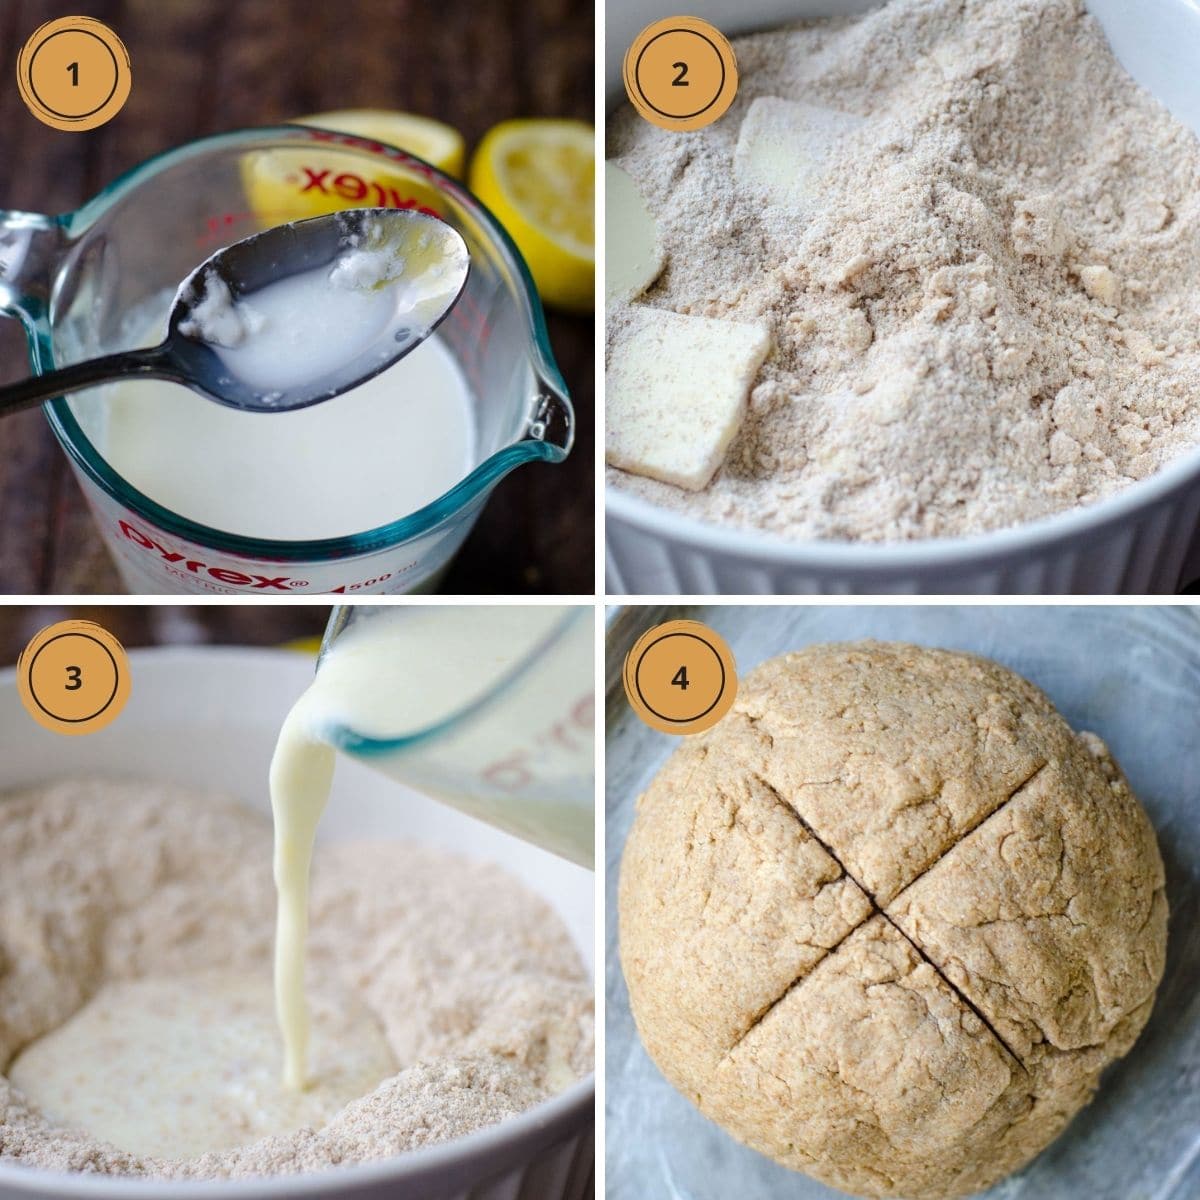 Steps for making soda bread without buttermilk.